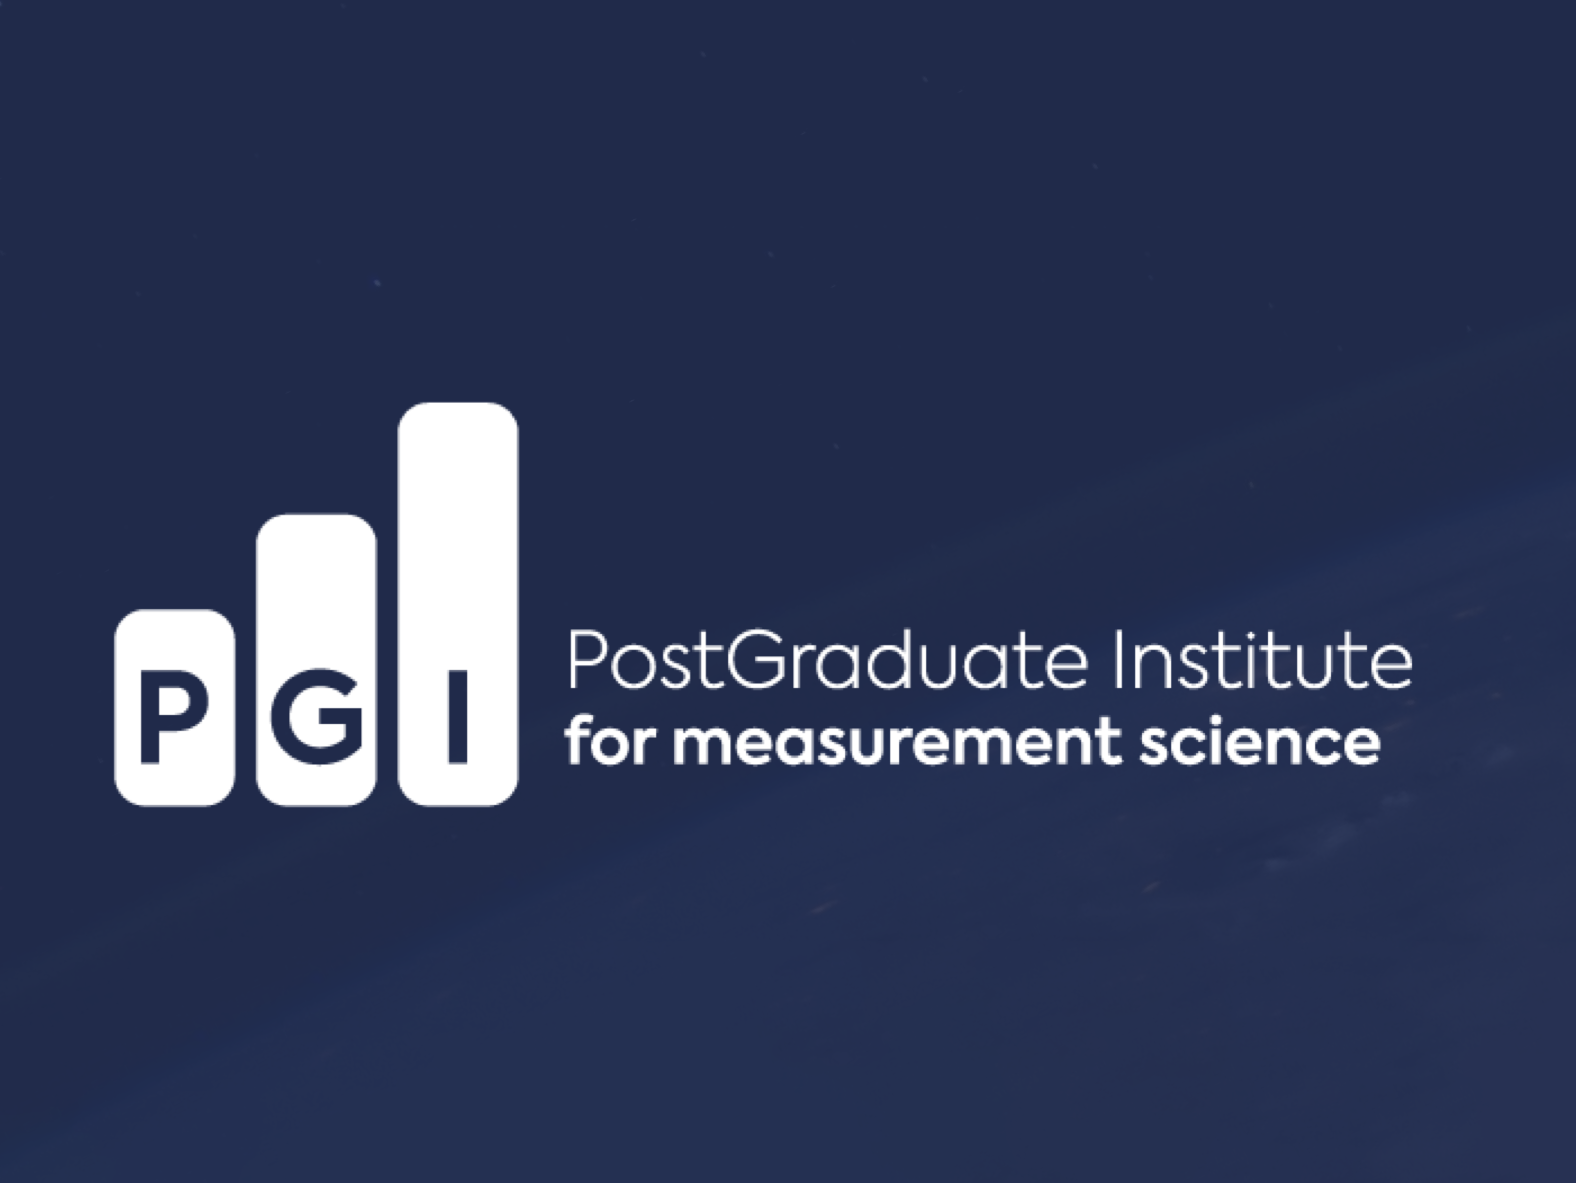 Tackling Global Challenges through Measurement Science